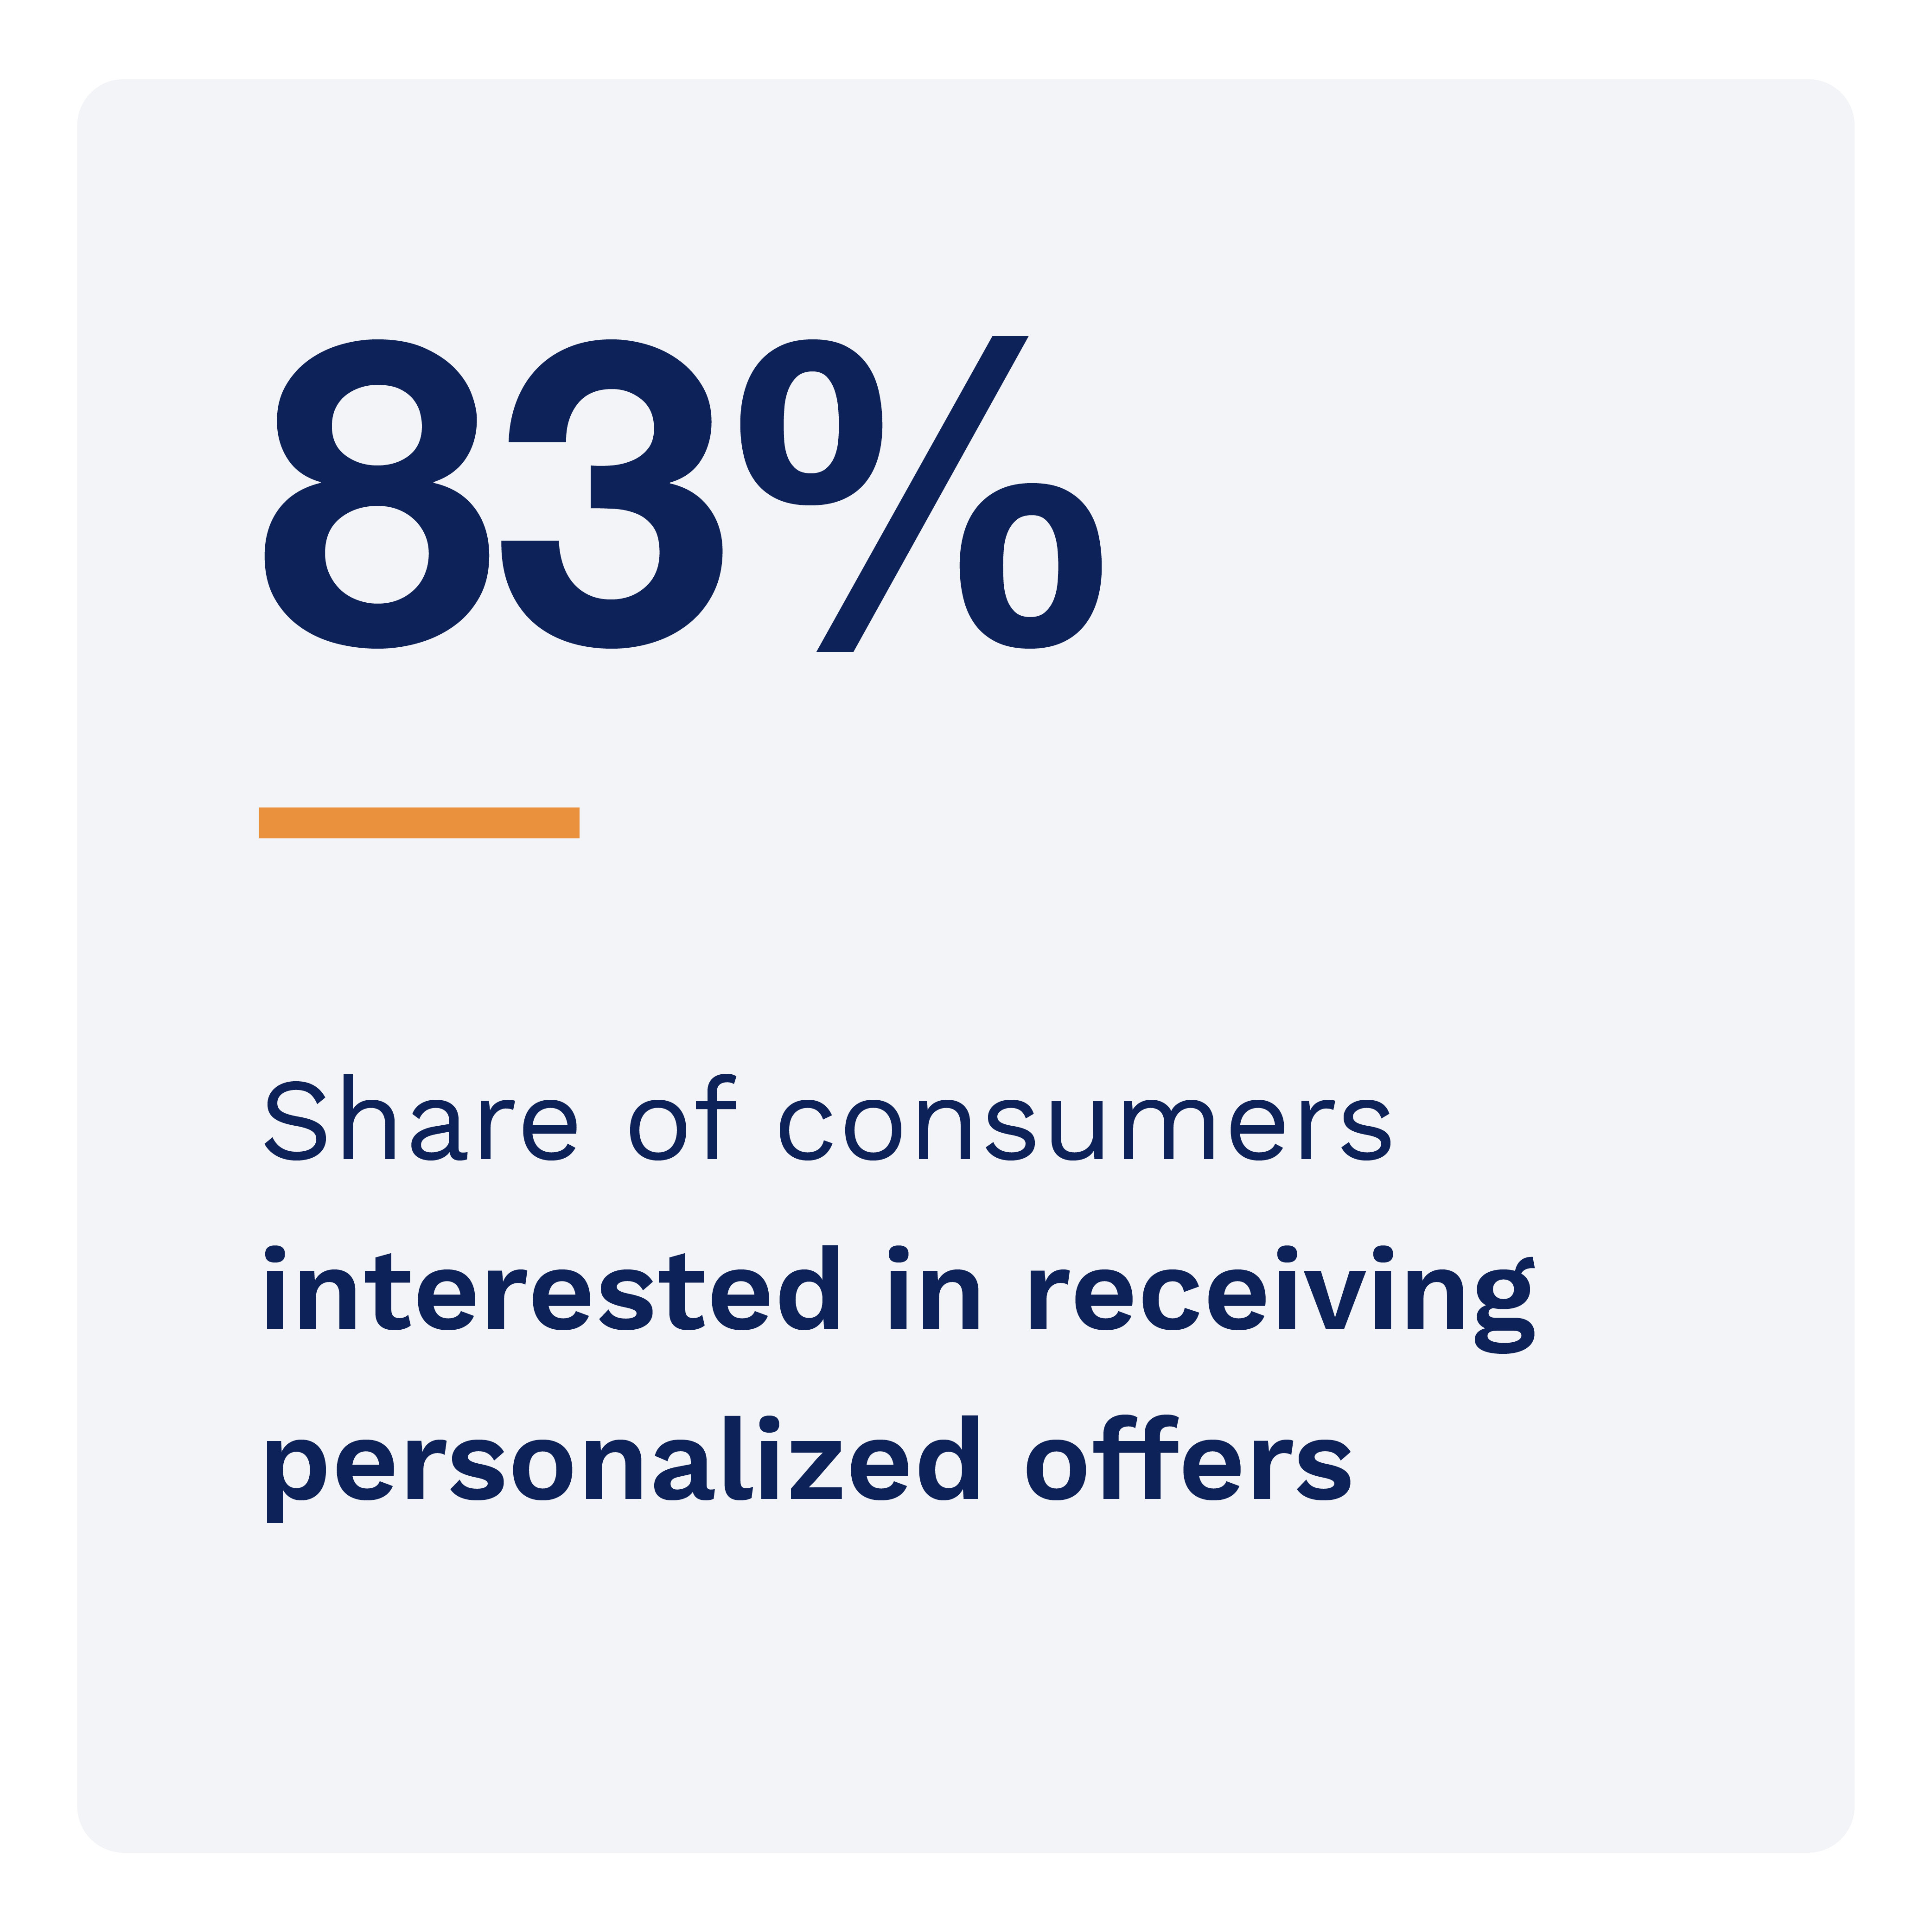 83%: Share of consumers interested in receiving personalized offers